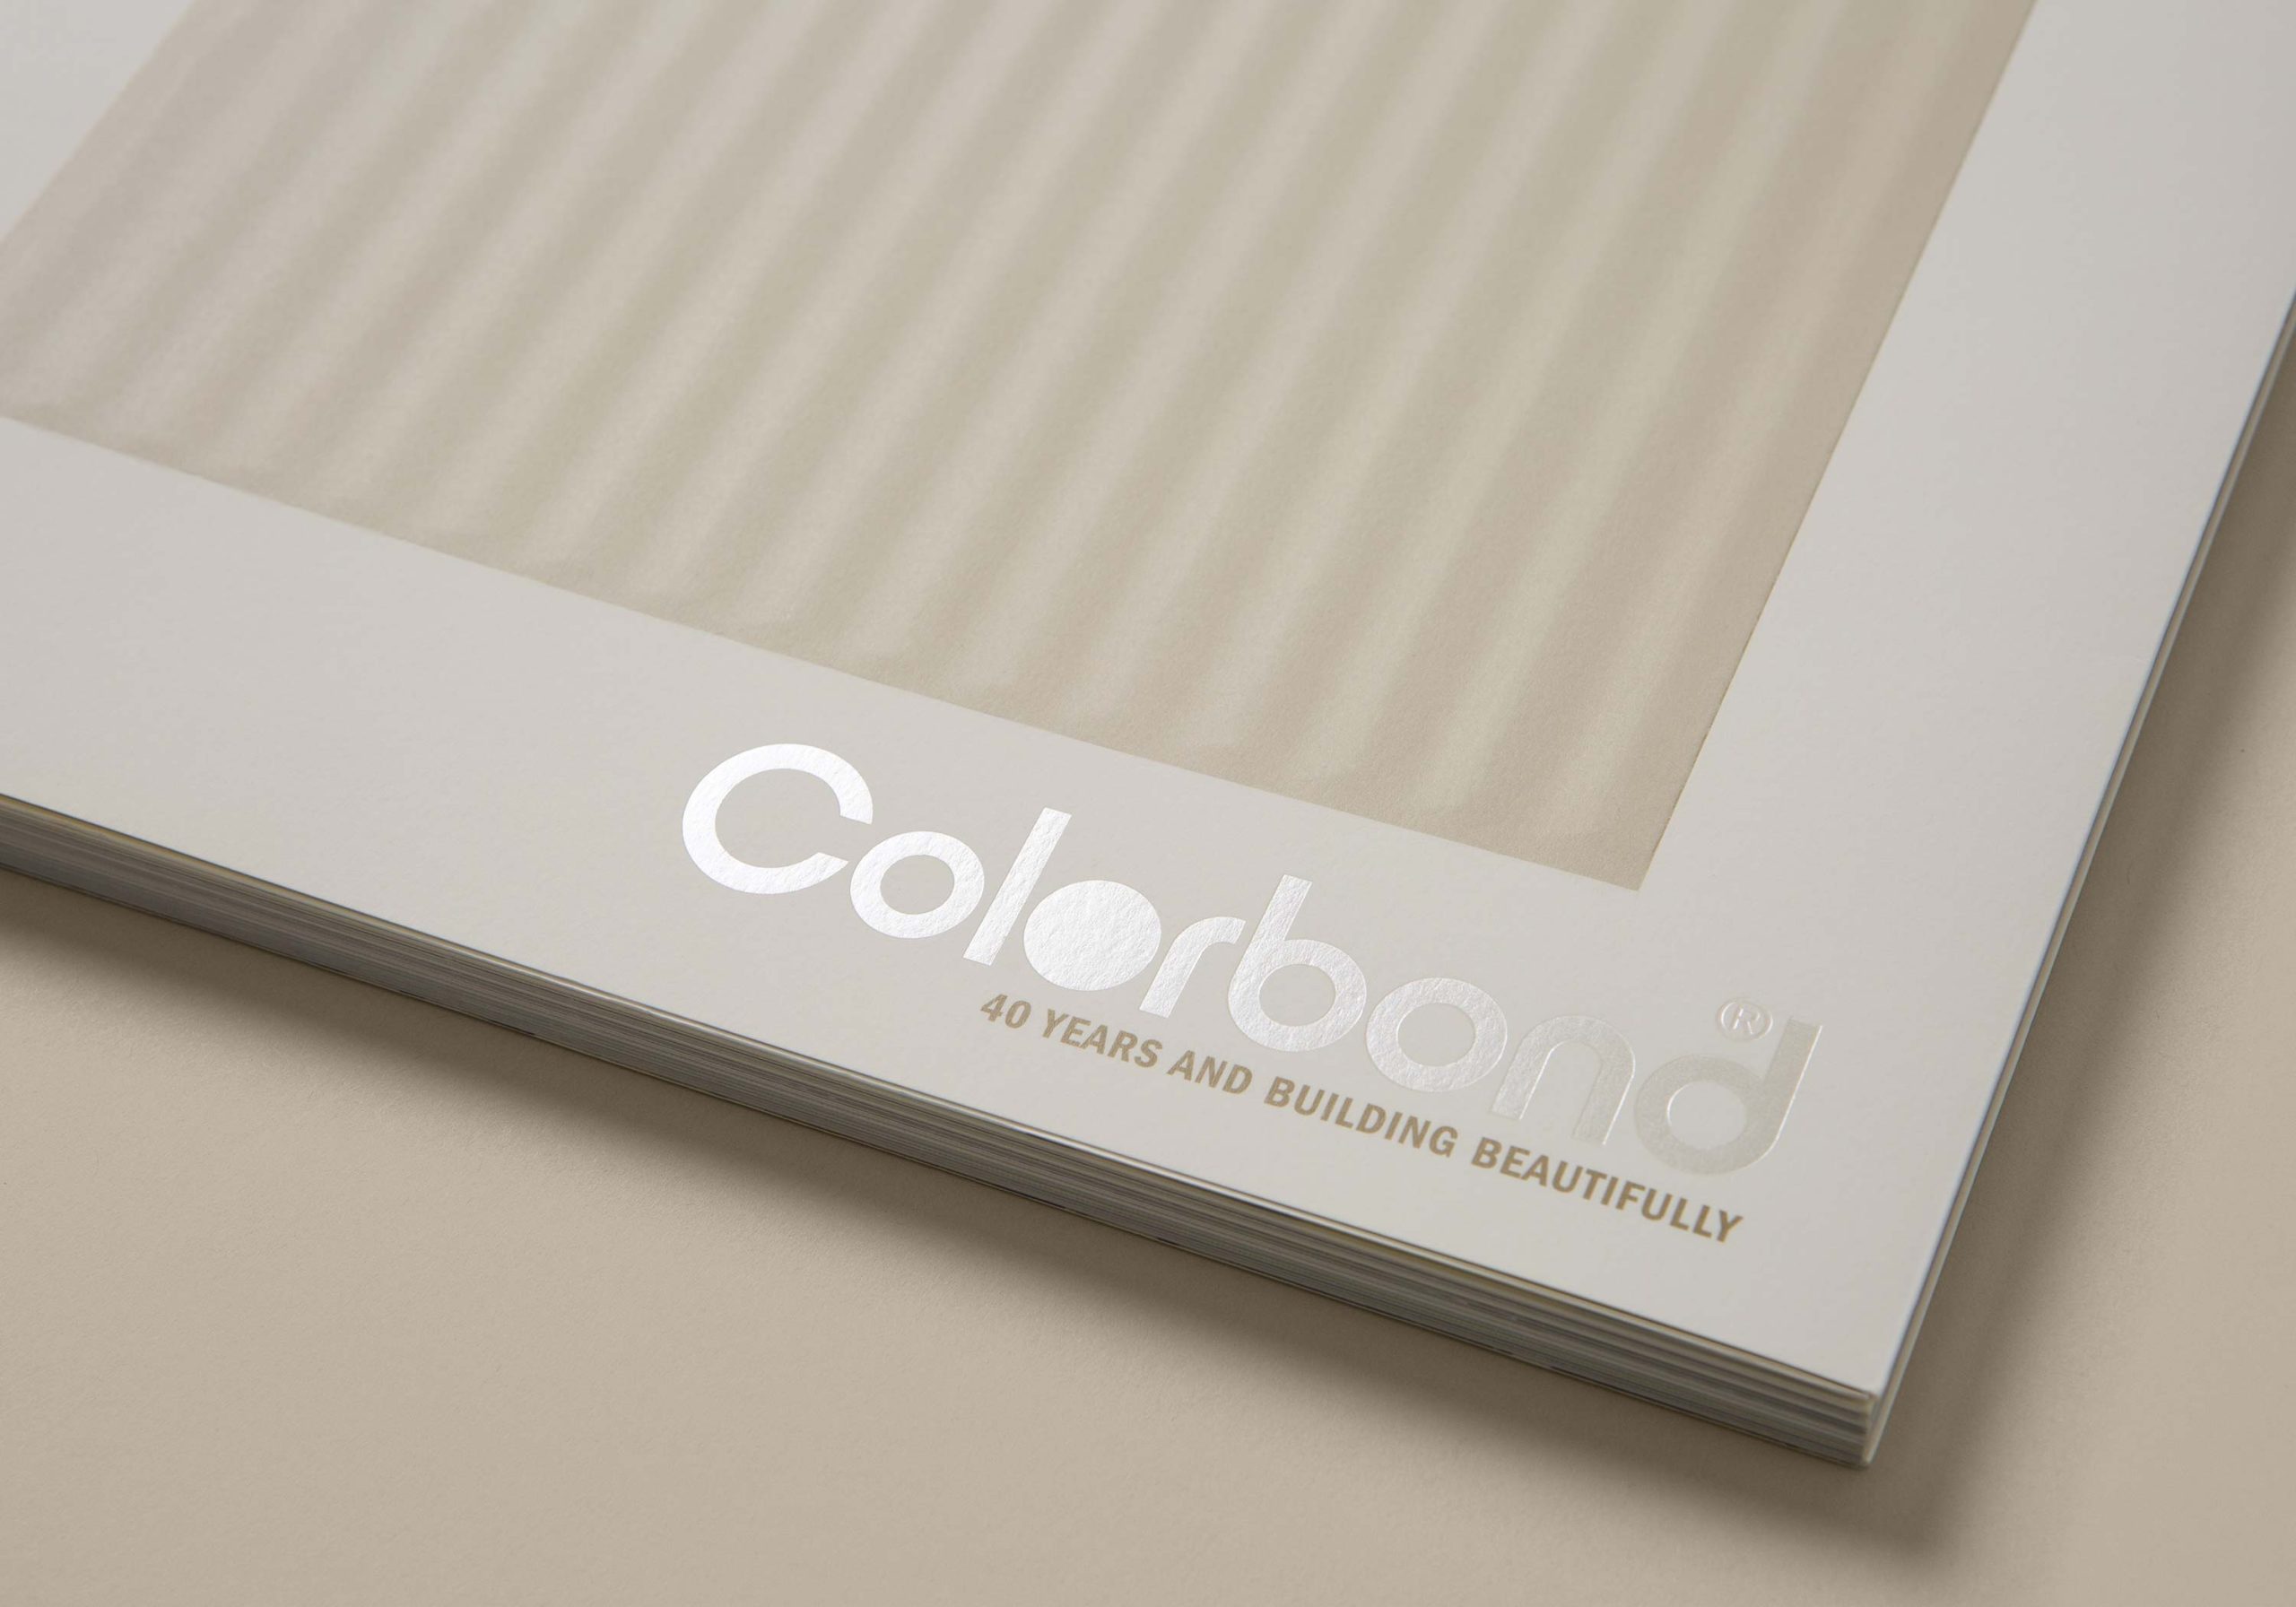 This Is Ikon - Colorbond® Steel